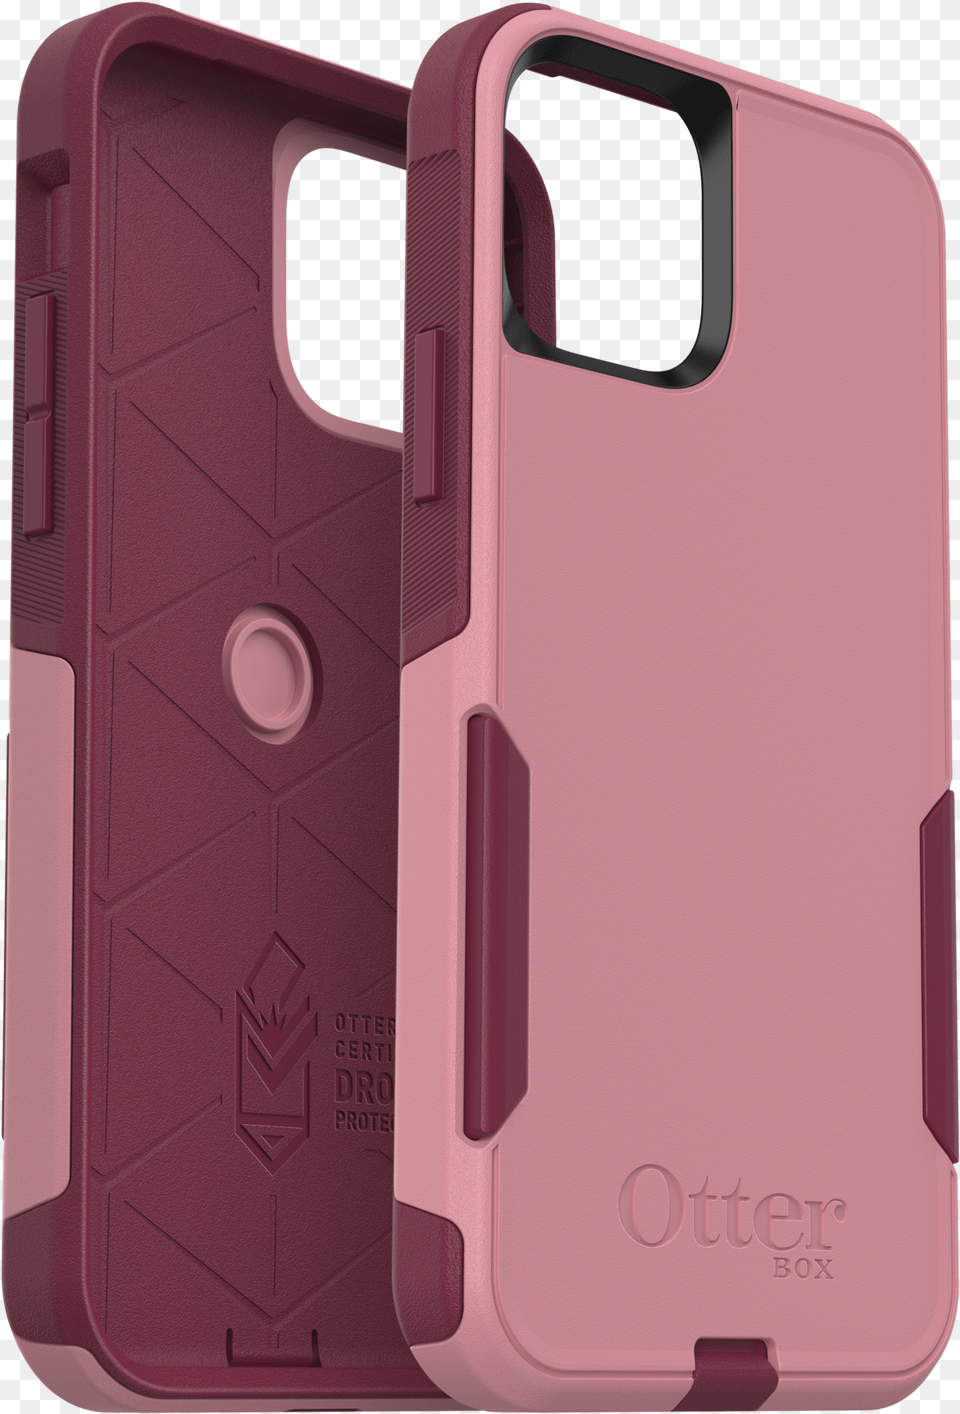 Otterbox Otterbox Iphone Xr Cases Otterbox, Electronics, Mobile Phone, Phone, Car Png Image